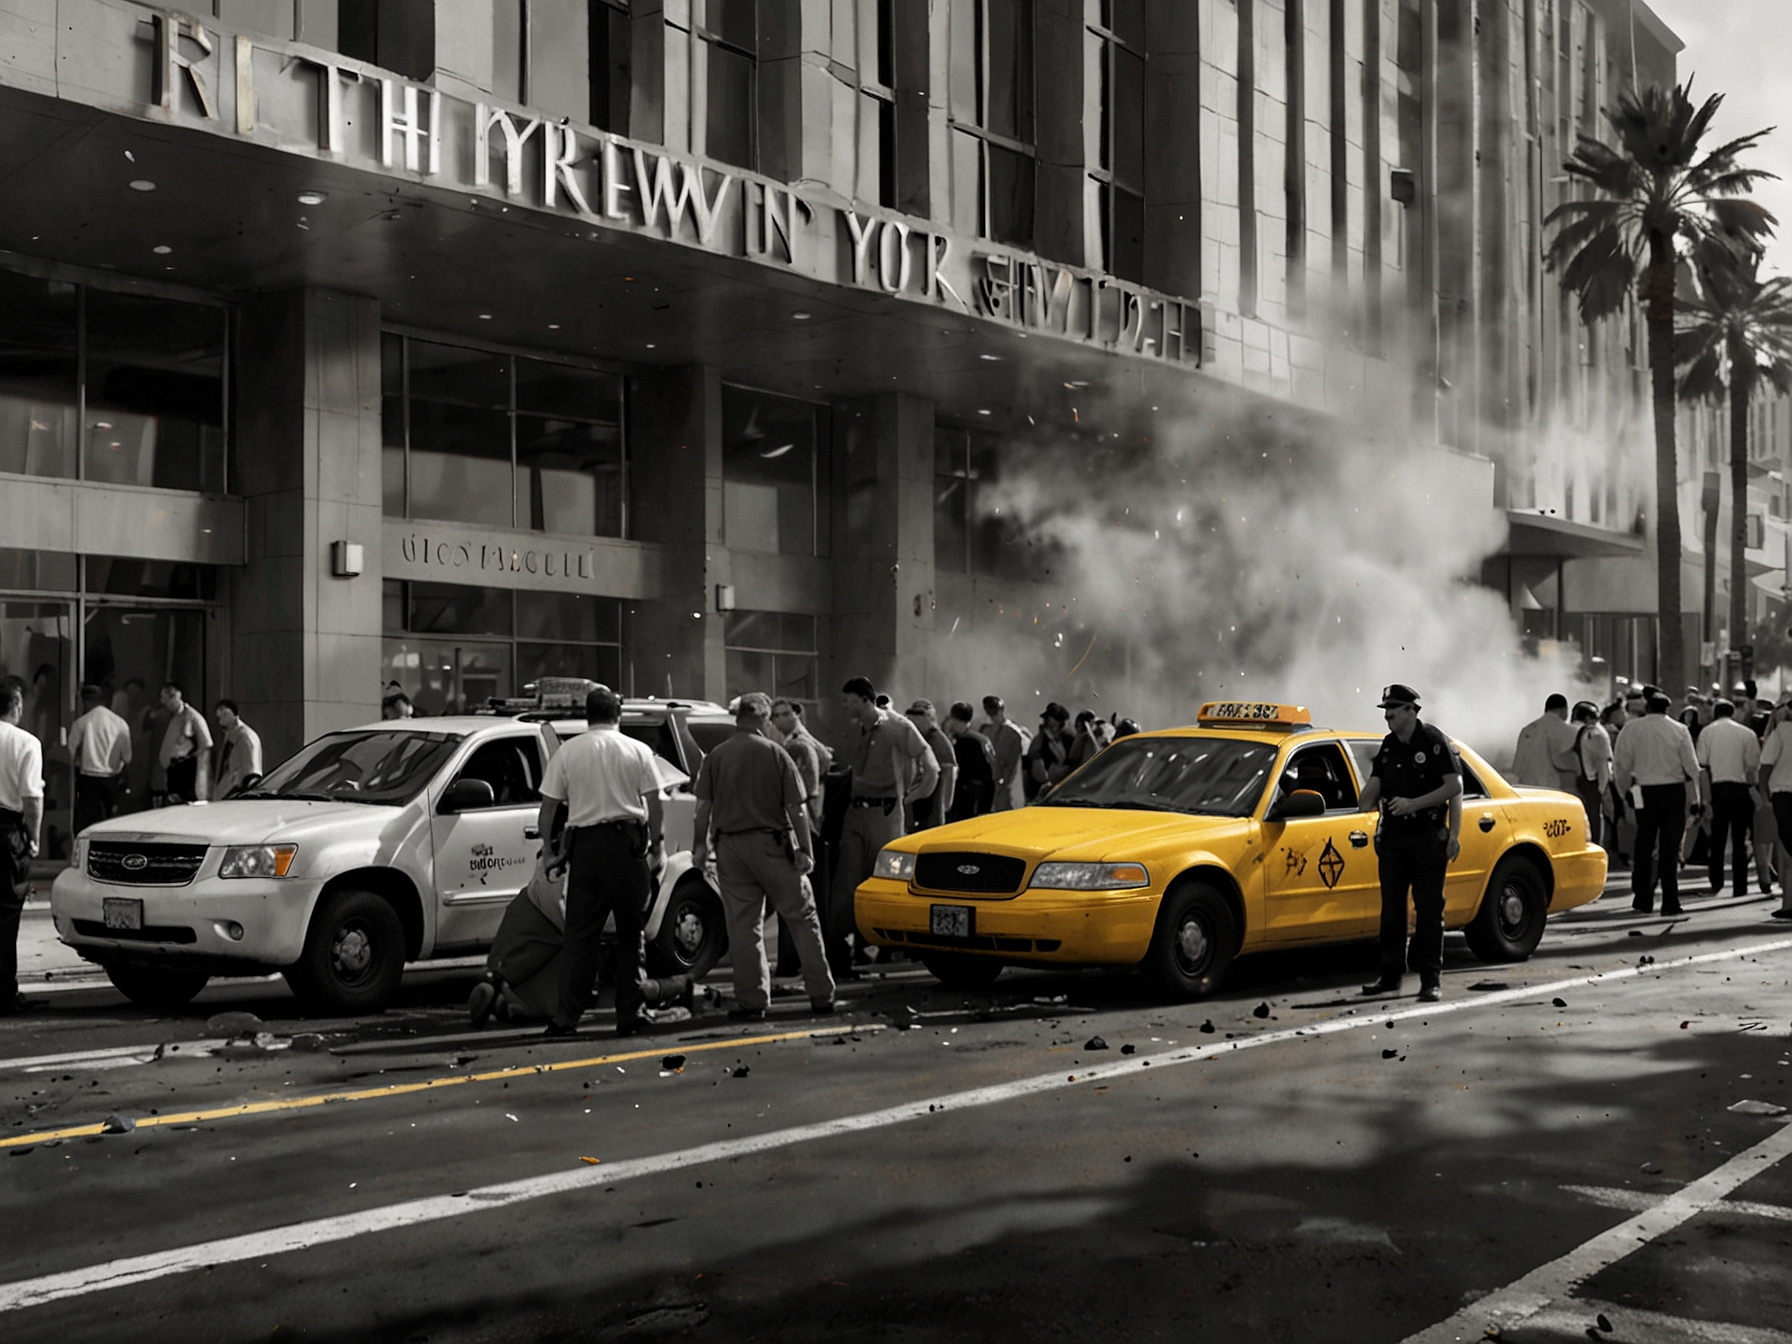 A bustling scene outside the New York New York hotel in Las Vegas, capturing the chaos and emergency response to the taxi crash that critically injured Brad Bognar.